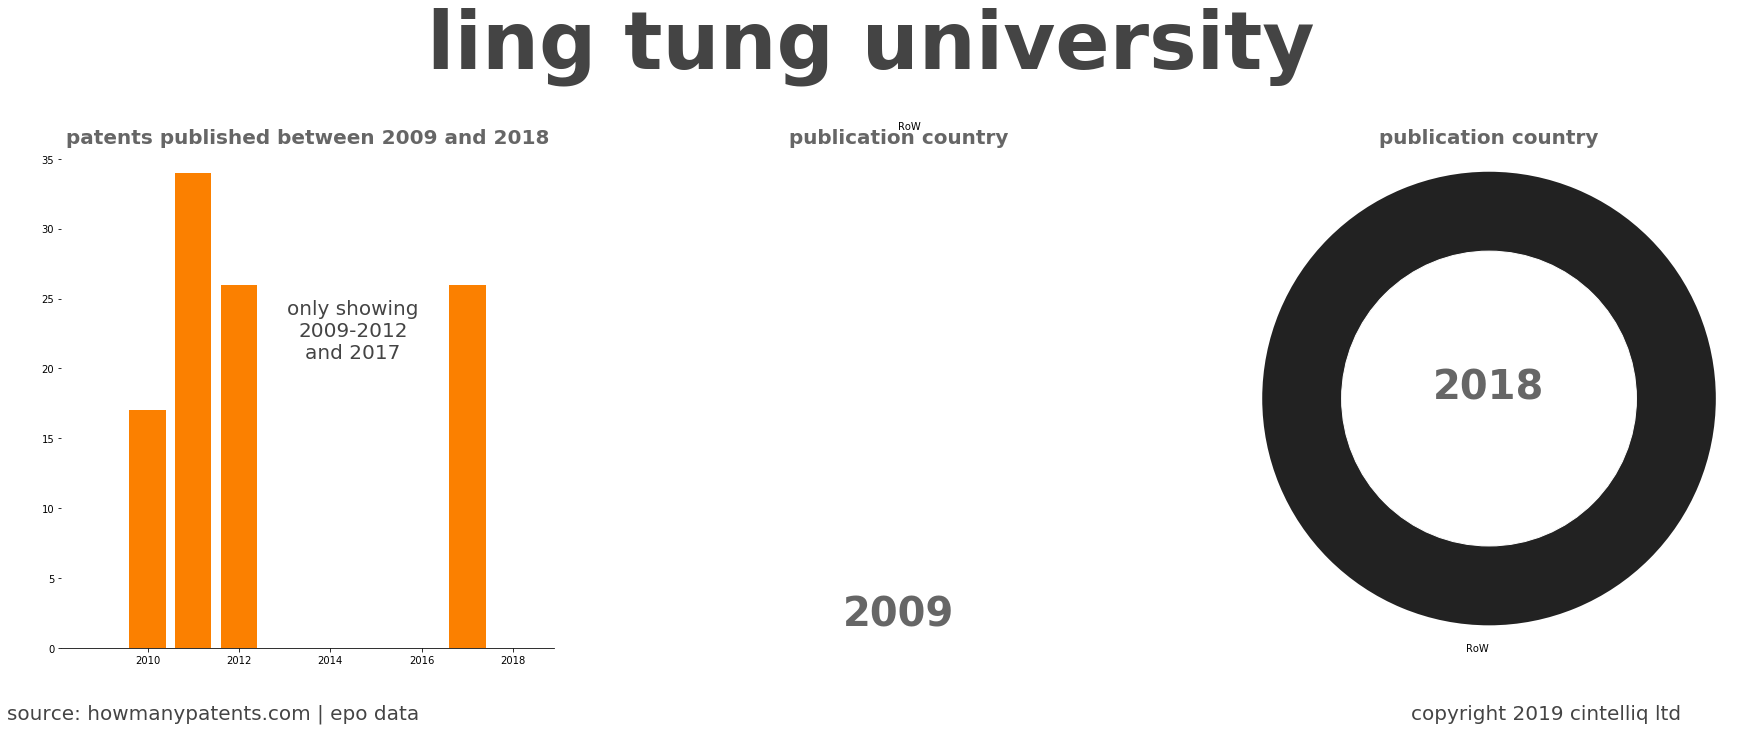 summary of patents for Ling Tung University